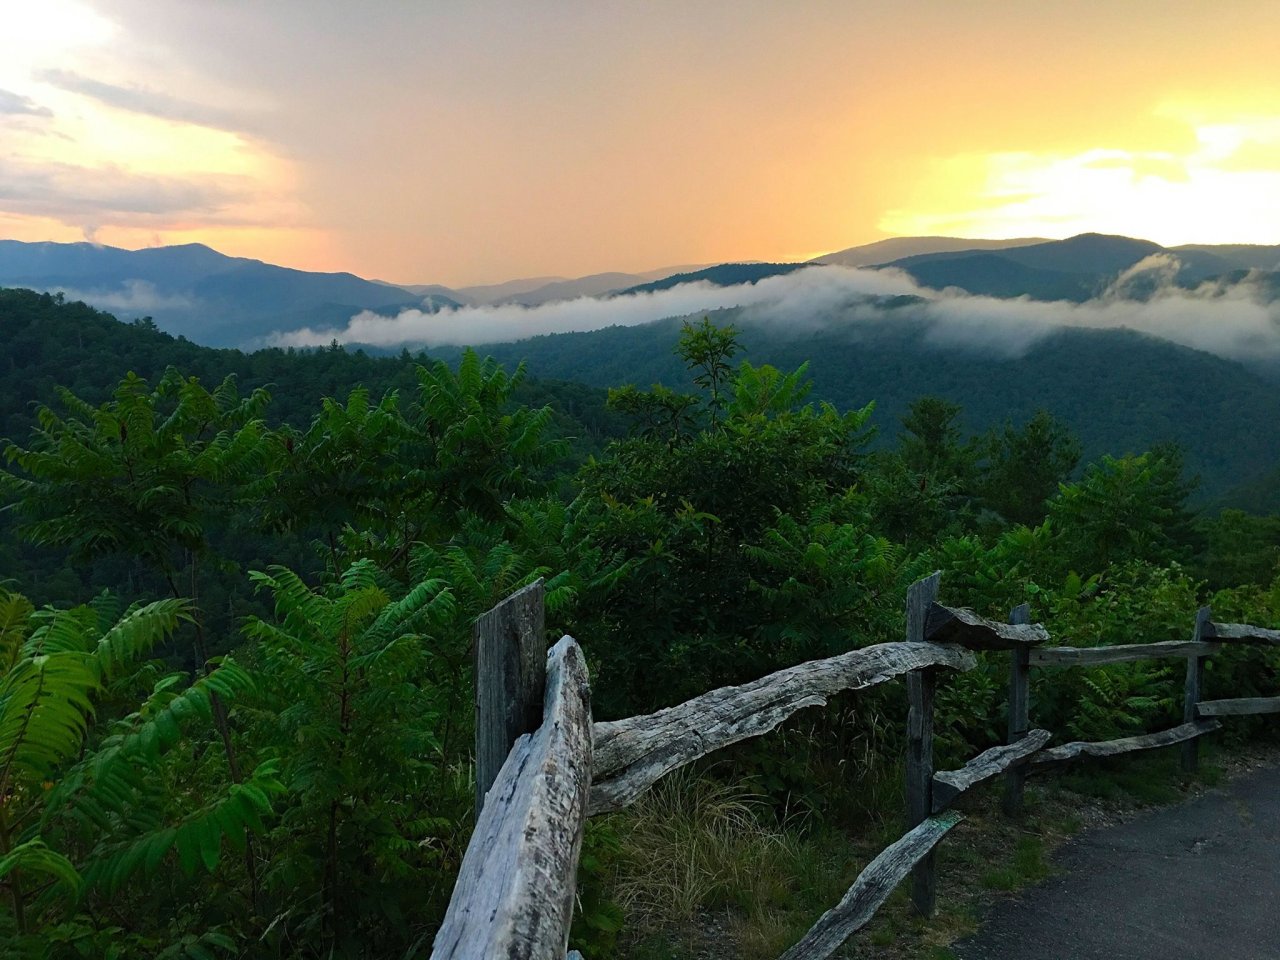 A view of the Great Smoky Mountain National Park during an outdoor activity.